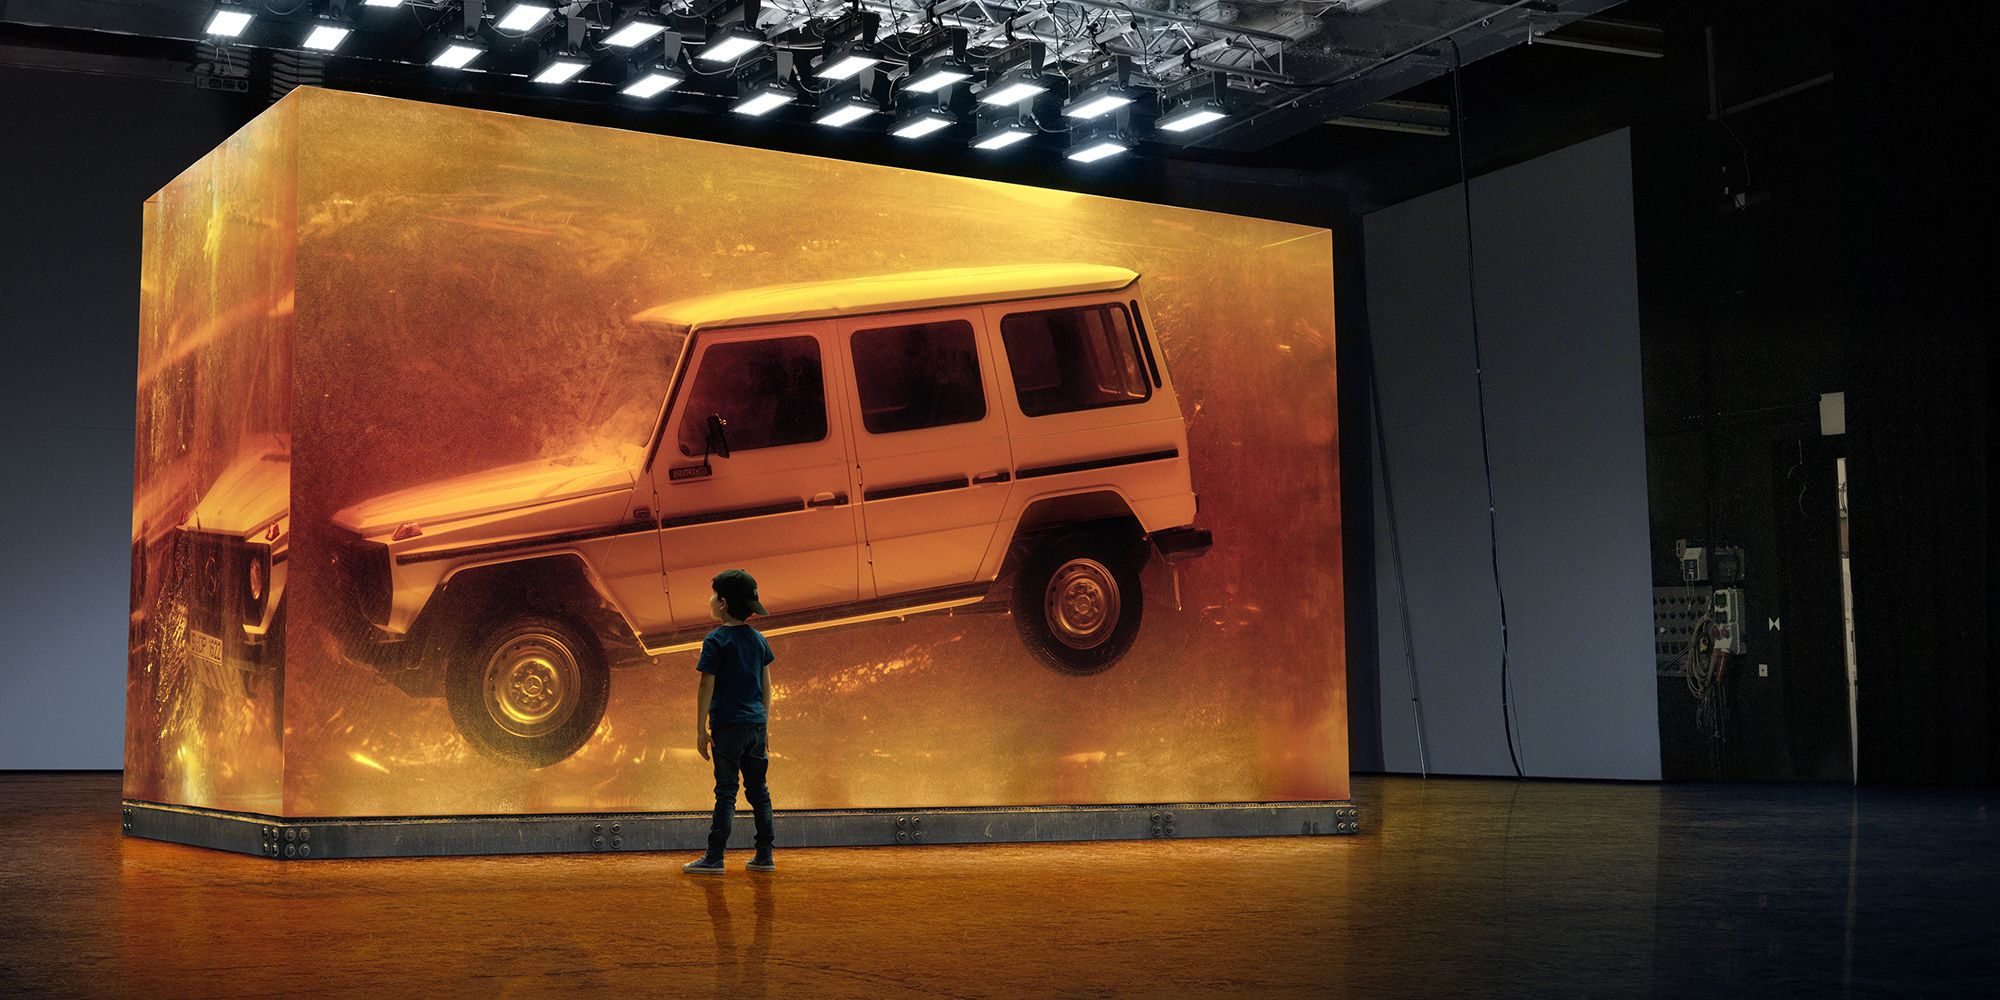 Mercedes Put a 1979 G-Wagen In 50 Tons Of Resin (From 2018)